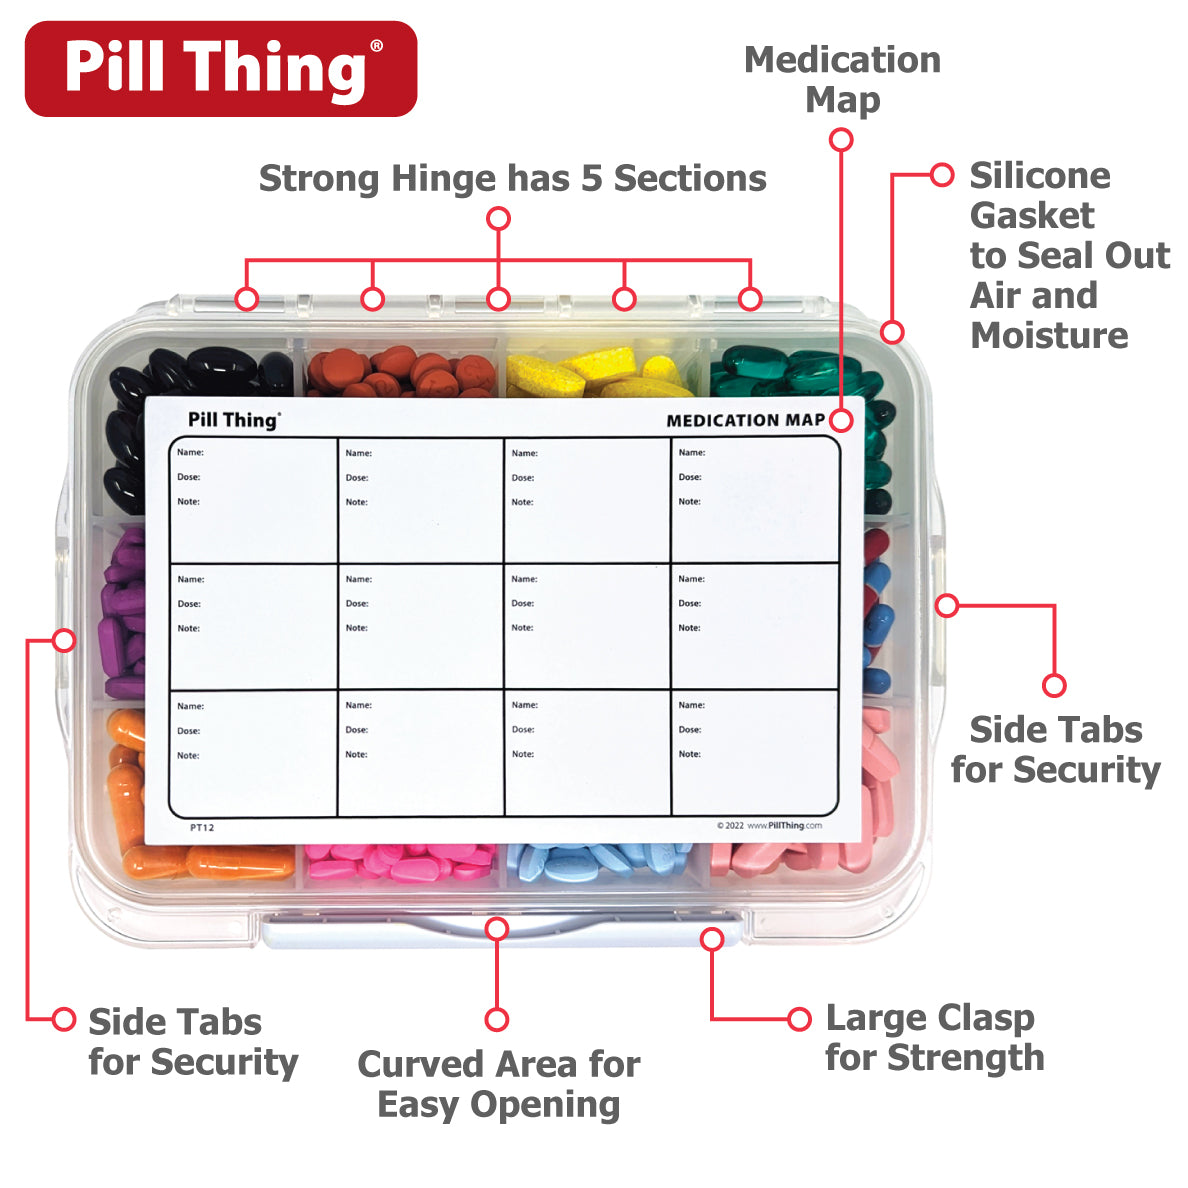 12 Compartment Large Pill Case with Airtight, Waterproof Seal, Medication Map Included